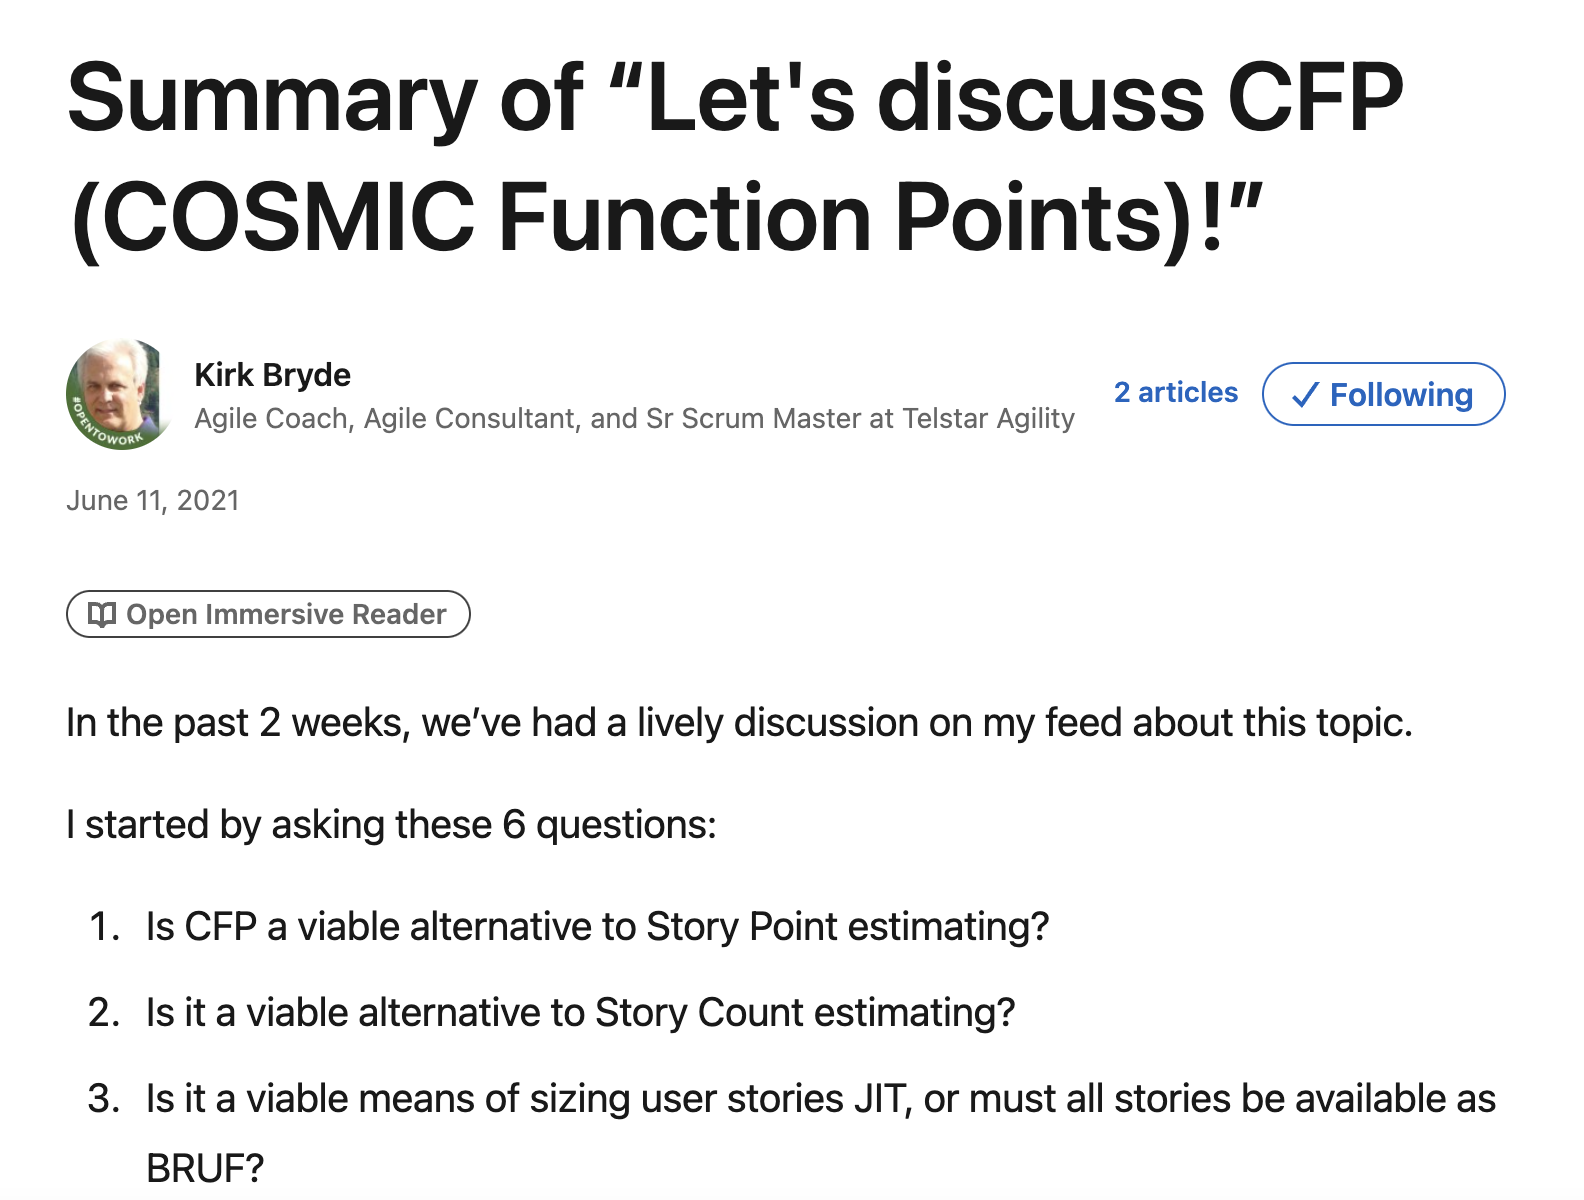 Summary of COSMIC Function Points and ScopeMaster by Kirk Bryde on LinkedIn